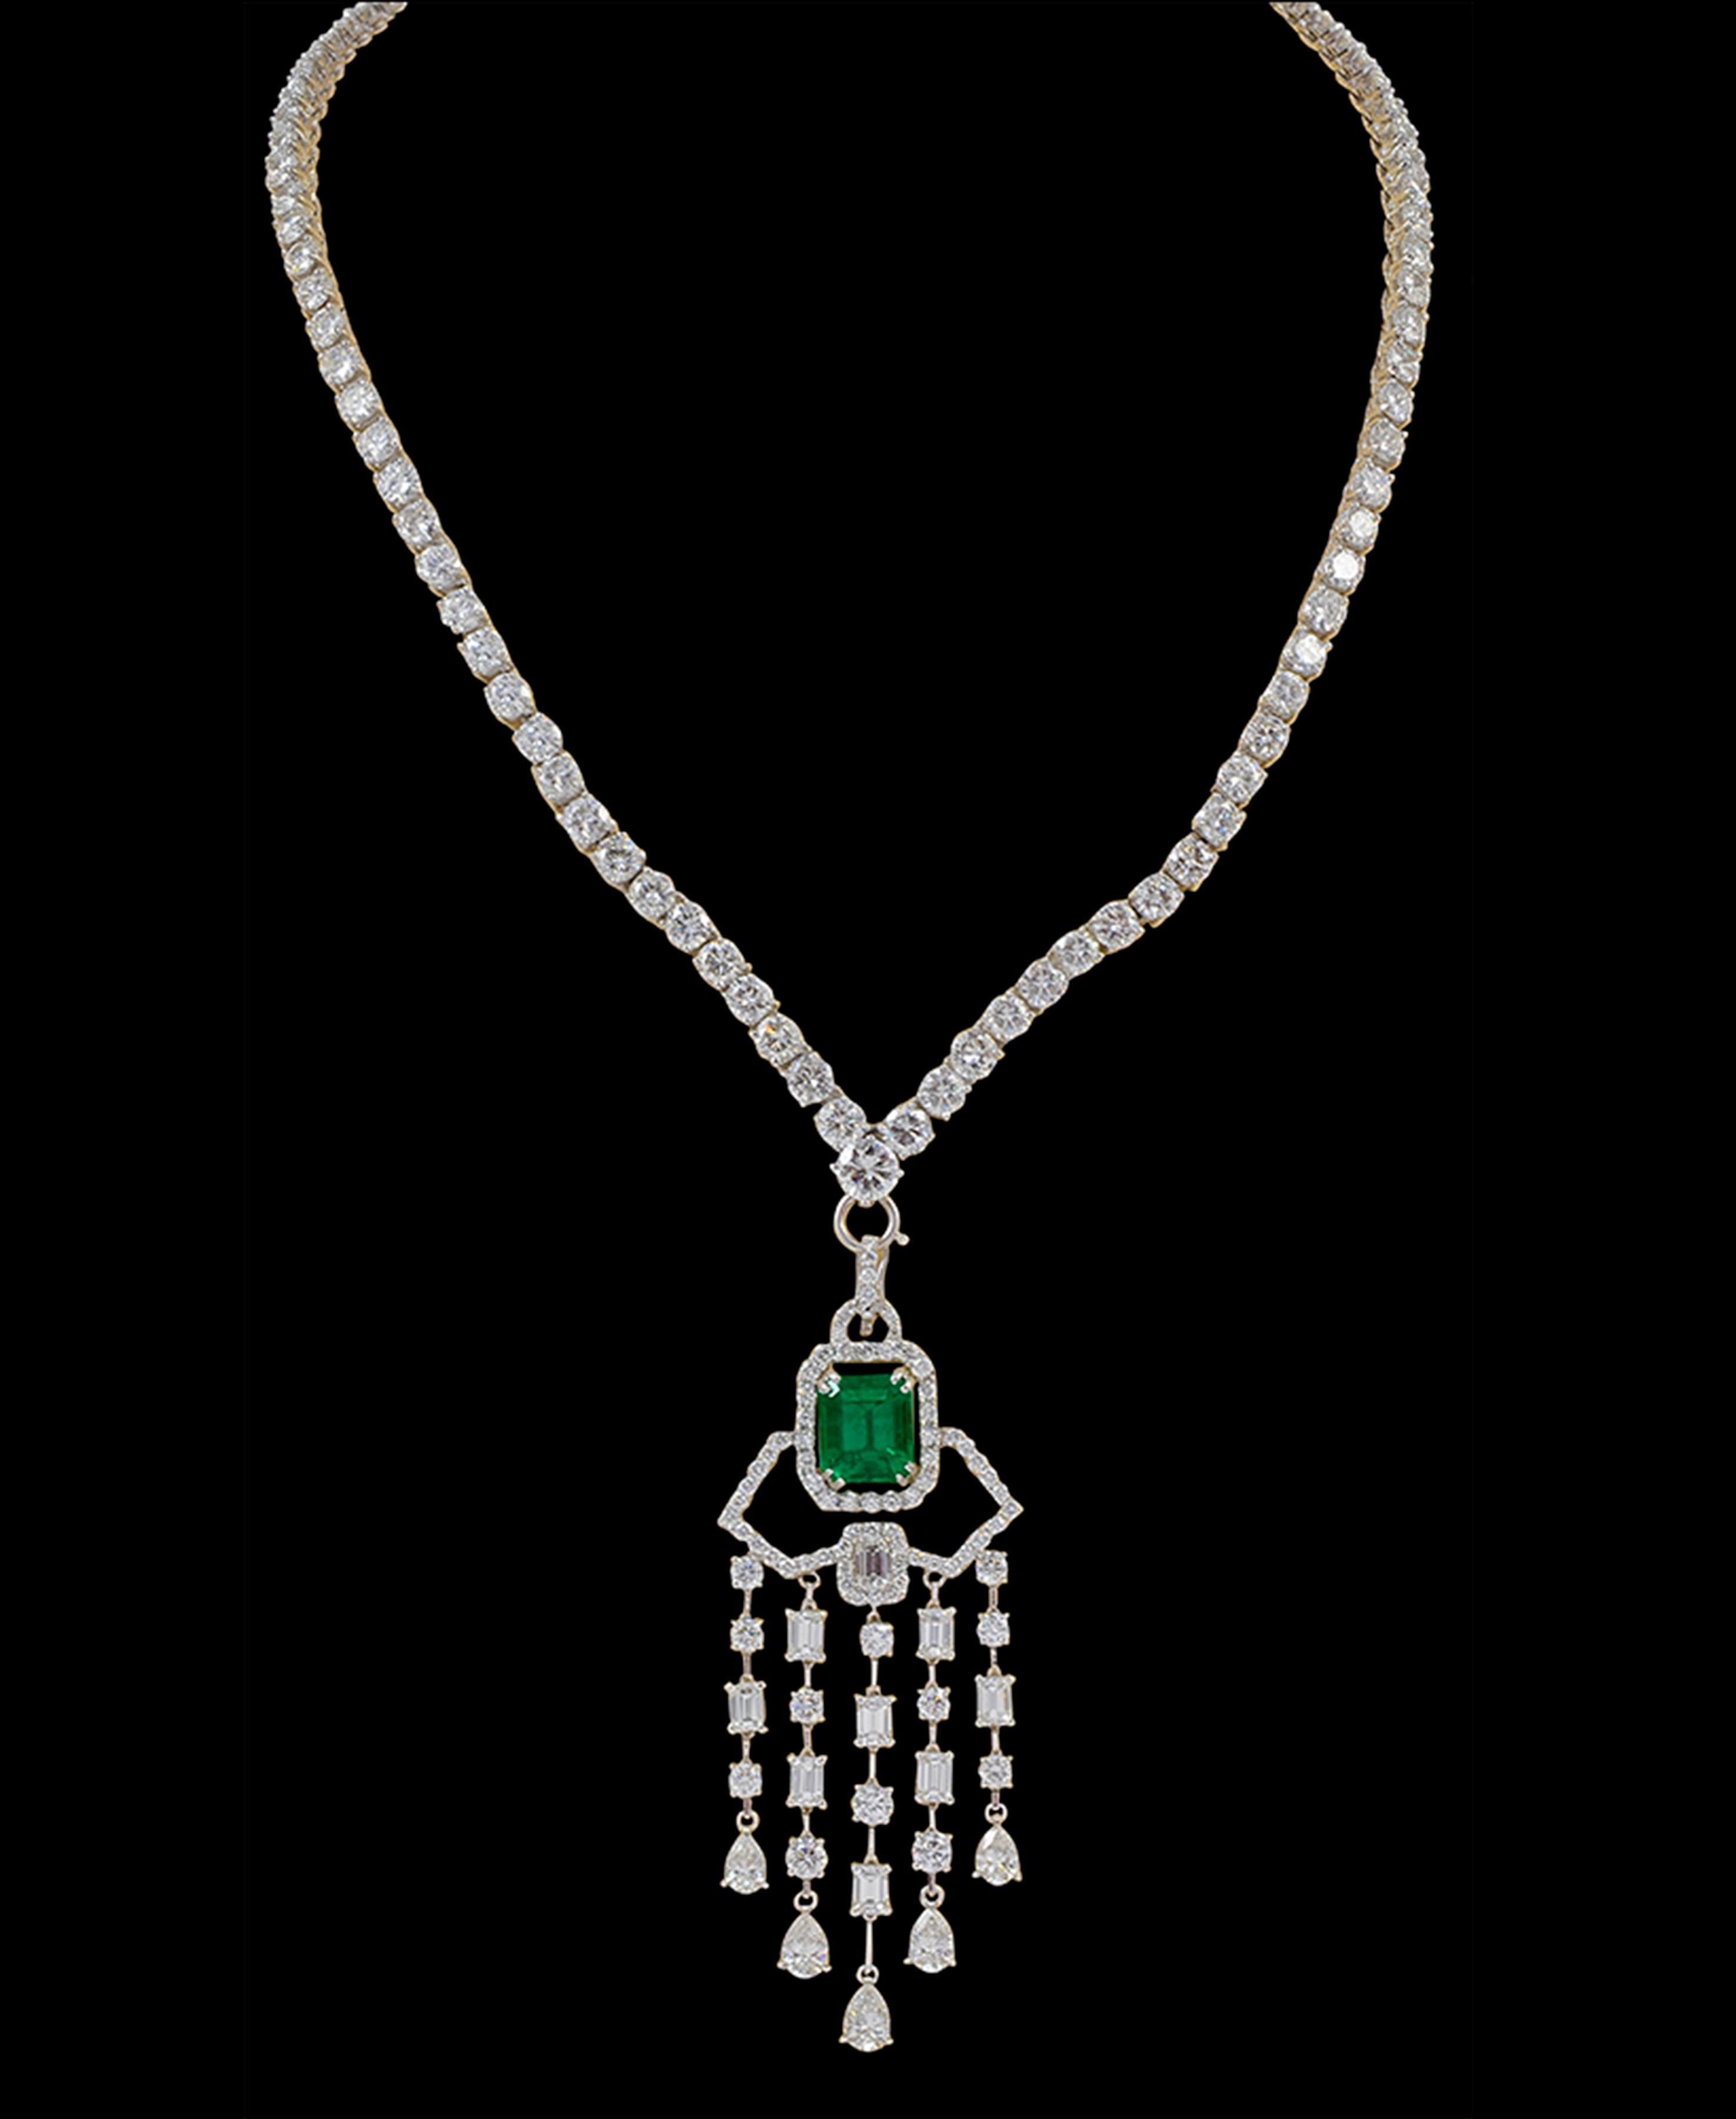 Emerald Cut Colombian Emerald & Diamond  Riviera &   Drop  Changeable  Necklace 18 Karat White gold 
This is Necklace can be worn as just Diamond Rivera Necklace too without the drop
18 Karat white gold Riviera  necklace with Graduating Brilliant